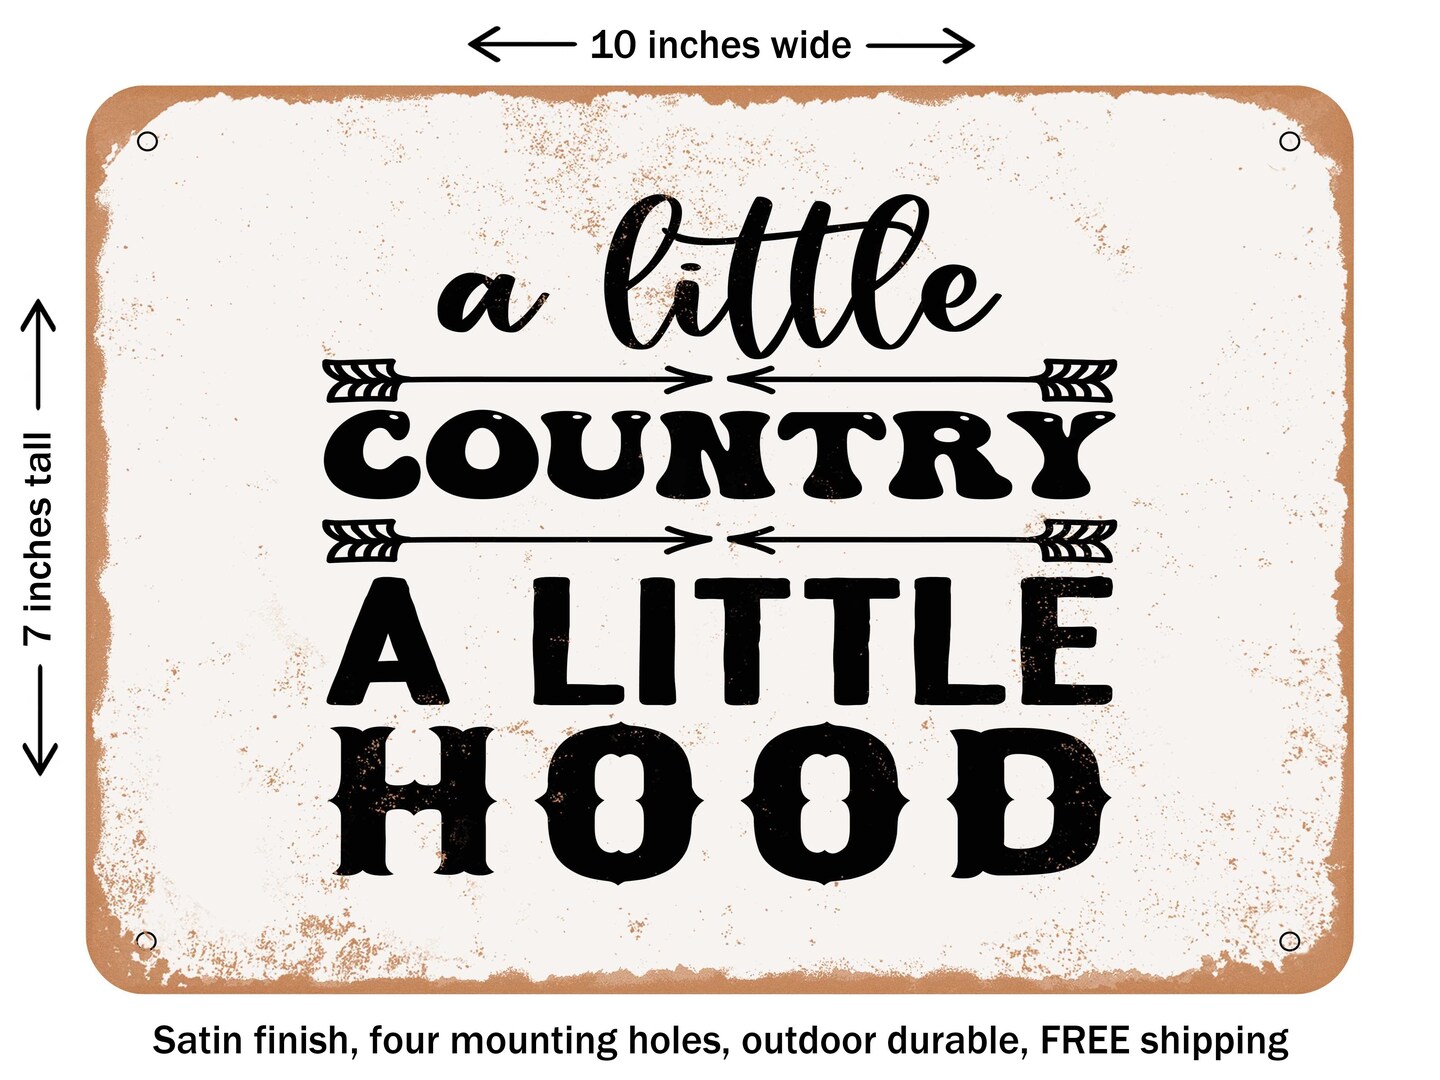 DECORATIVE METAL SIGN - a Little Country a Little Hood - Vintage Rusty Look